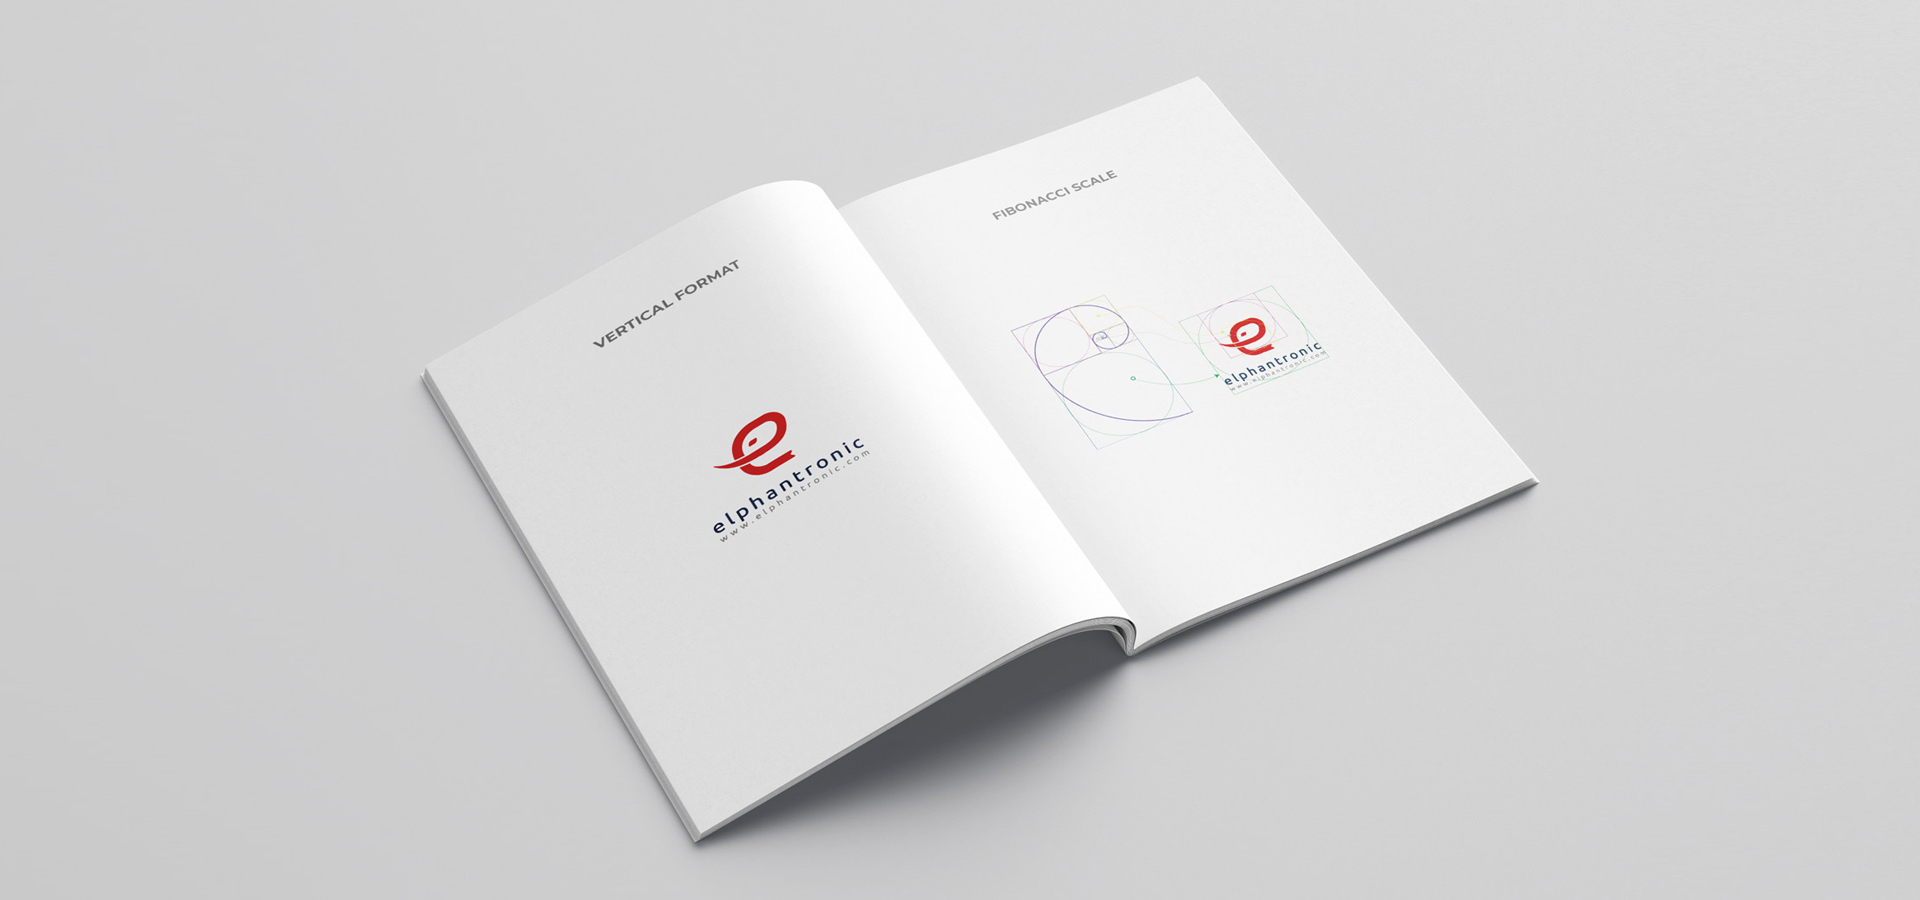 Elphantronic logo scale based on the Fibonacci system shown on a brand book.